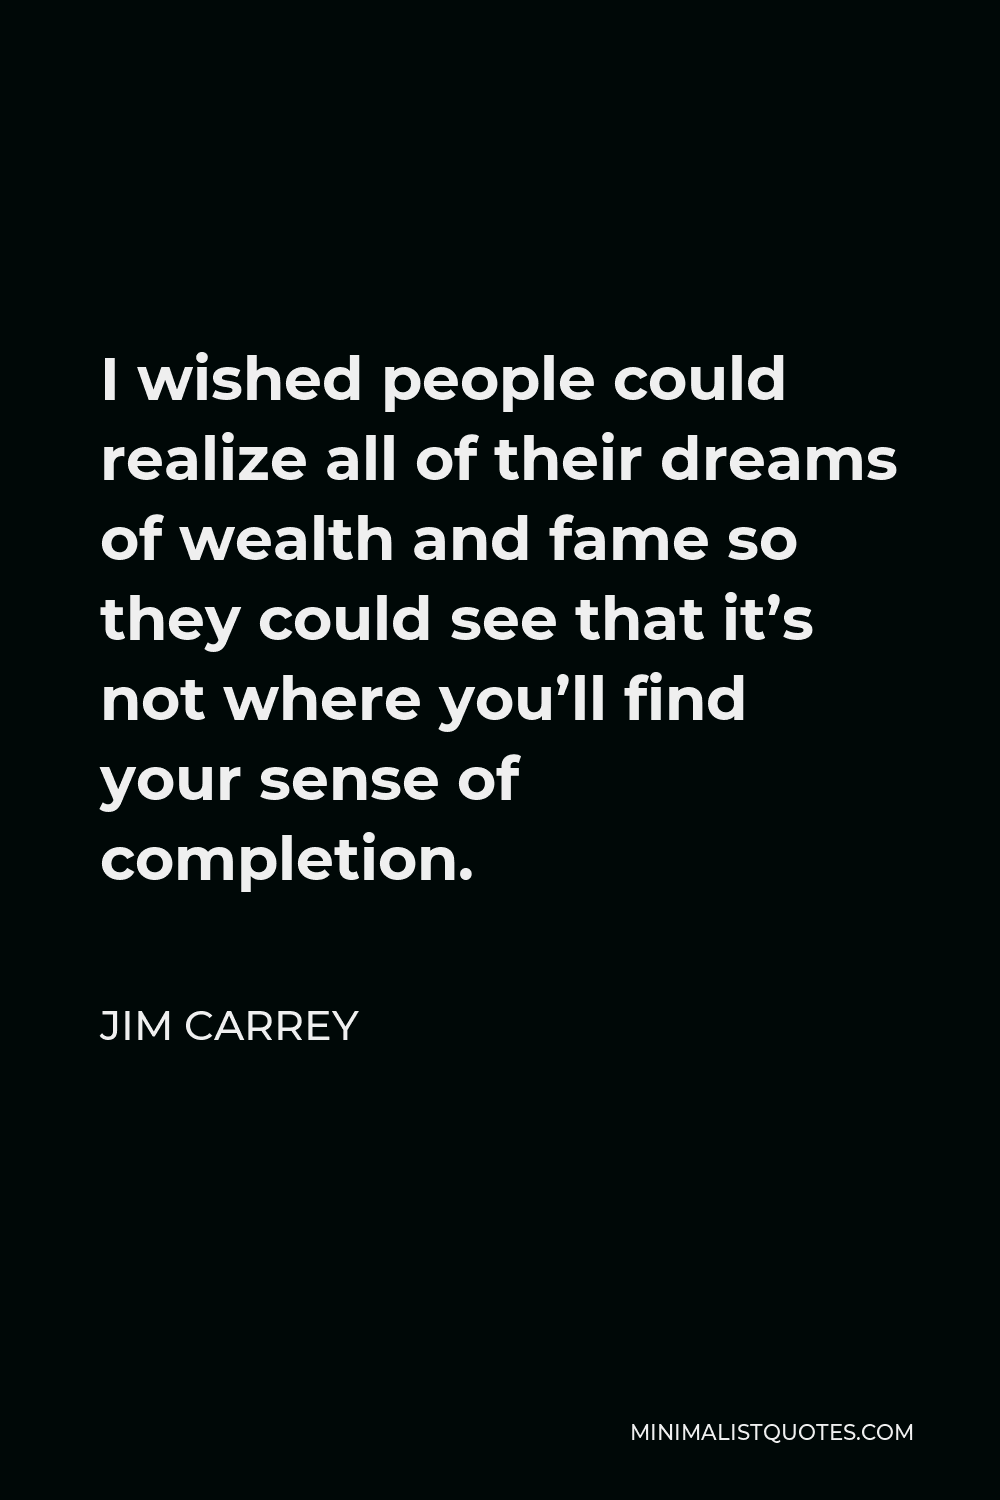 Jim Carrey Quote - I wished people could realize all of their dreams of wealth and fame so they could see that it’s not where you’ll find your sense of completion.